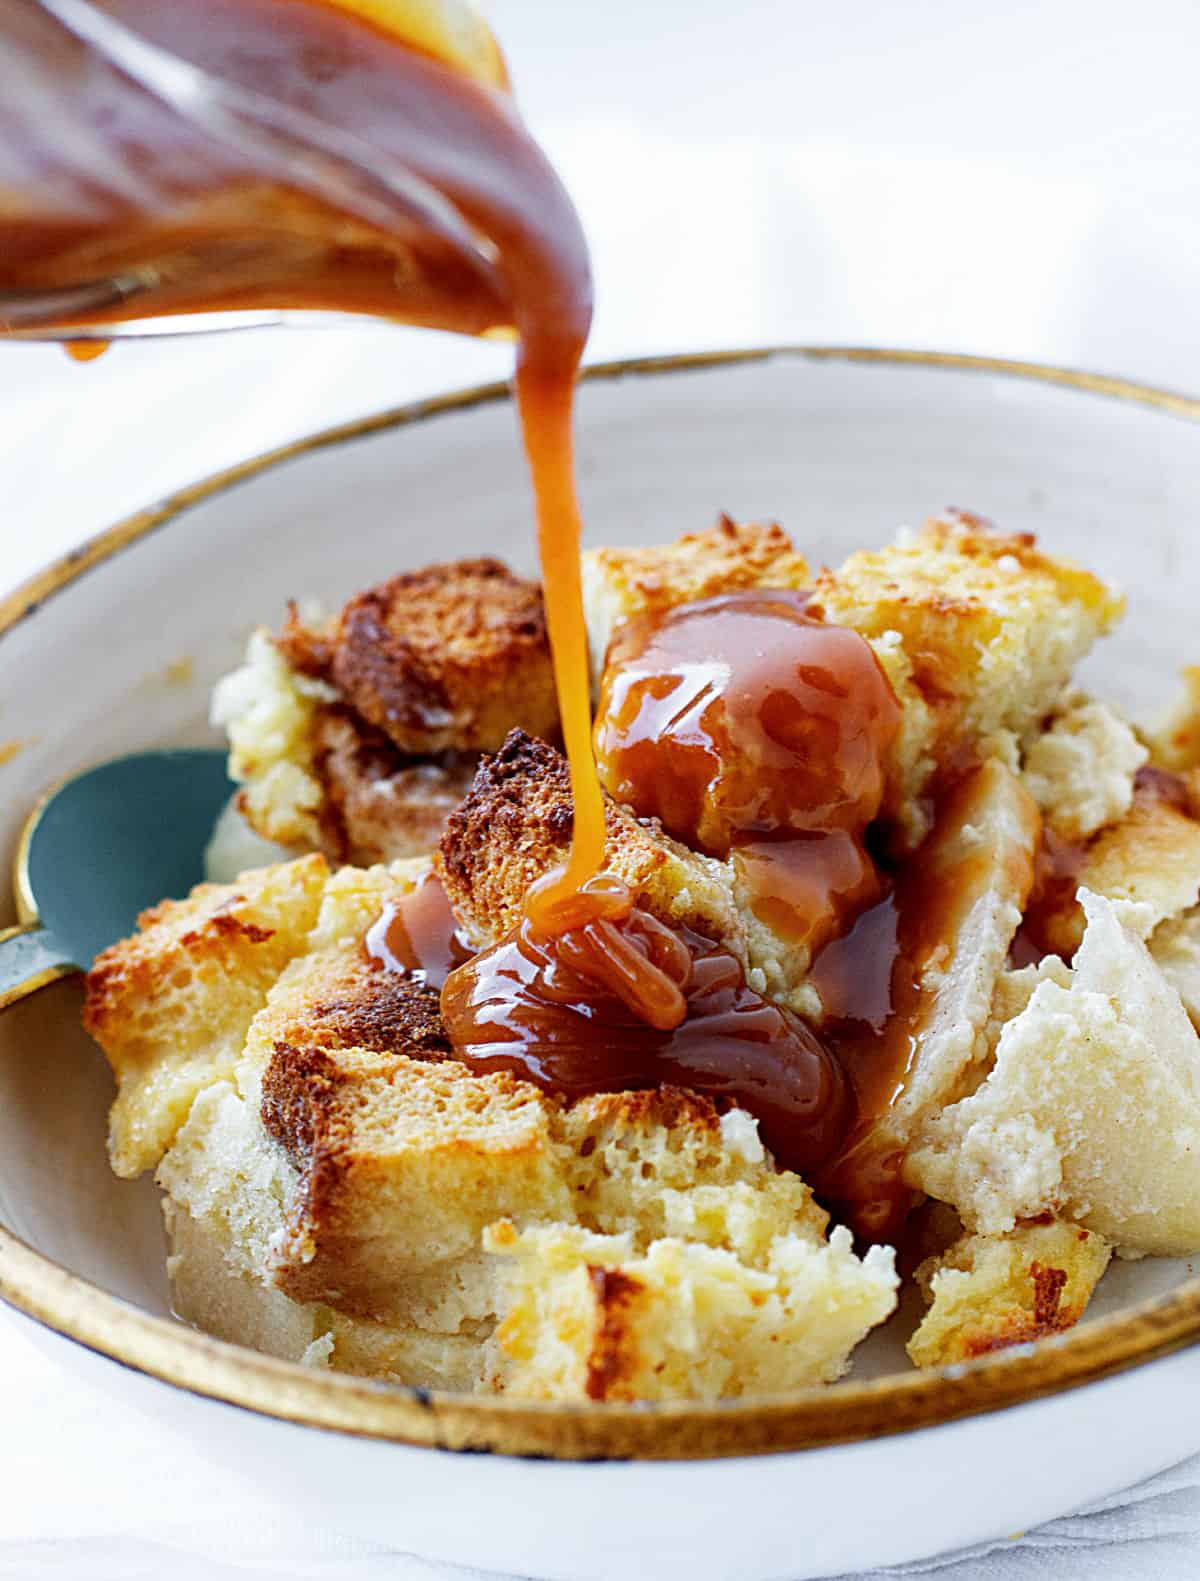 Pouring dulce de leche on serving of apple bread pudding, white bowl and background.